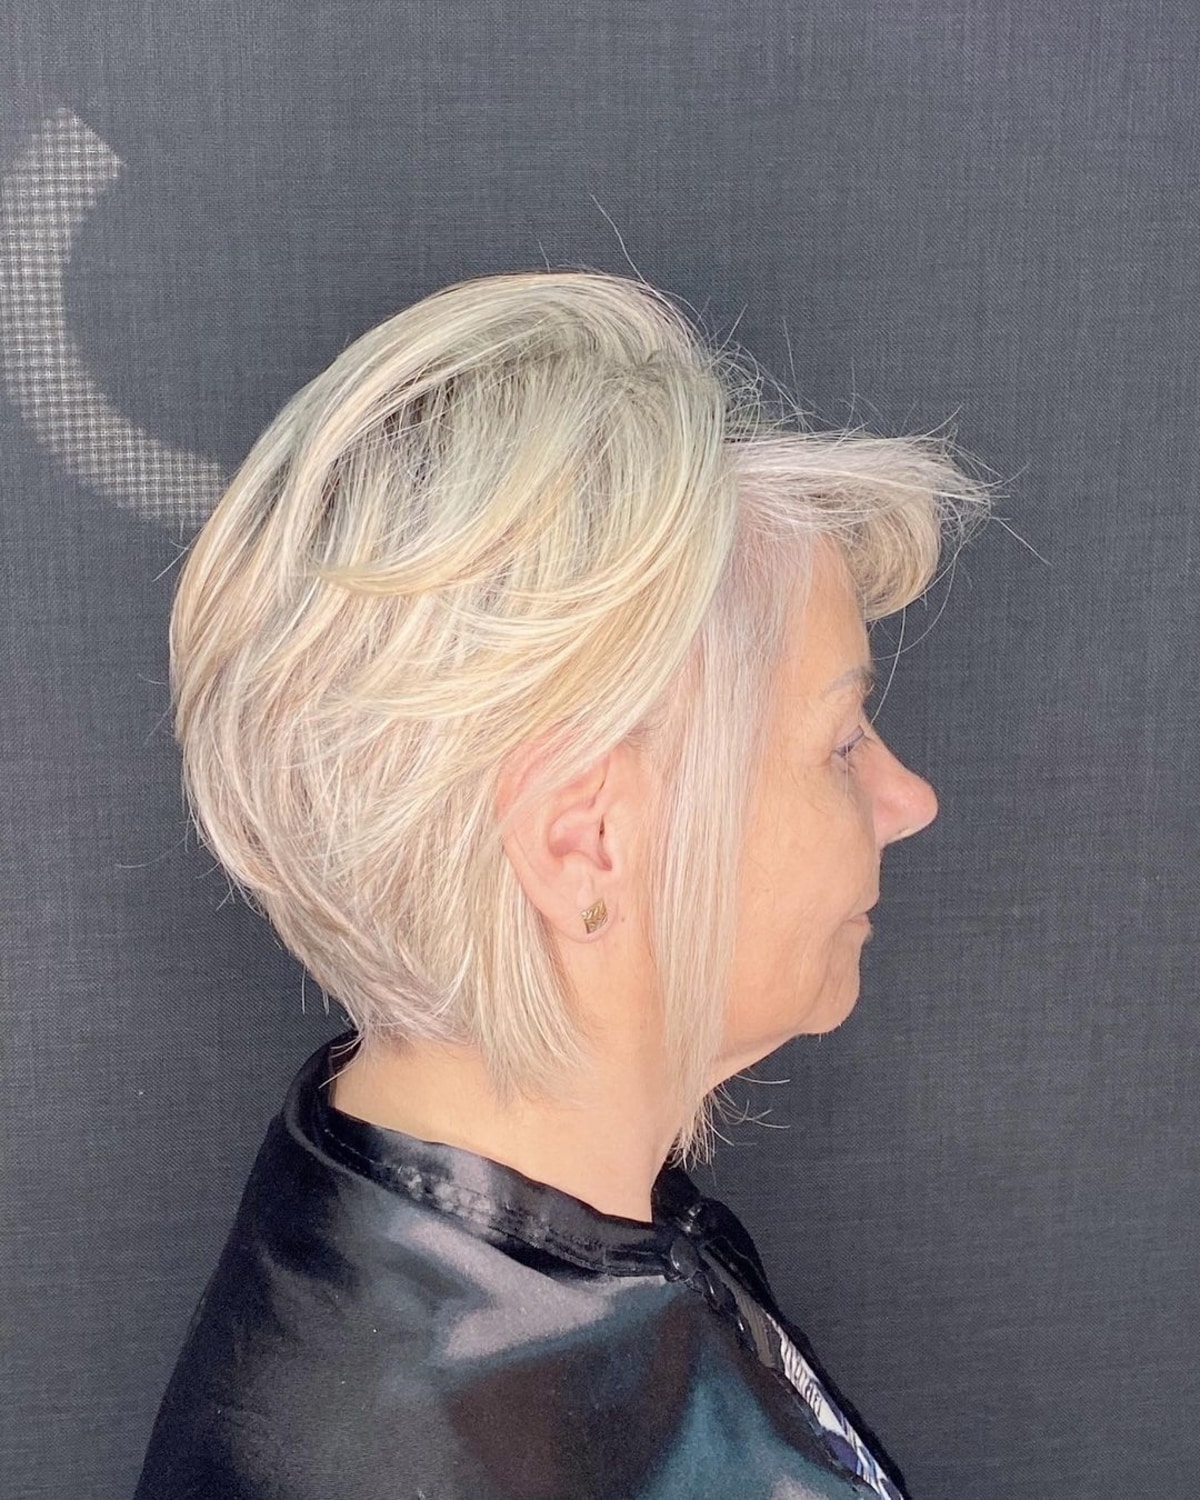 23 Trendy Hair Colors for Women Over 50 to Look 10 Years Younger